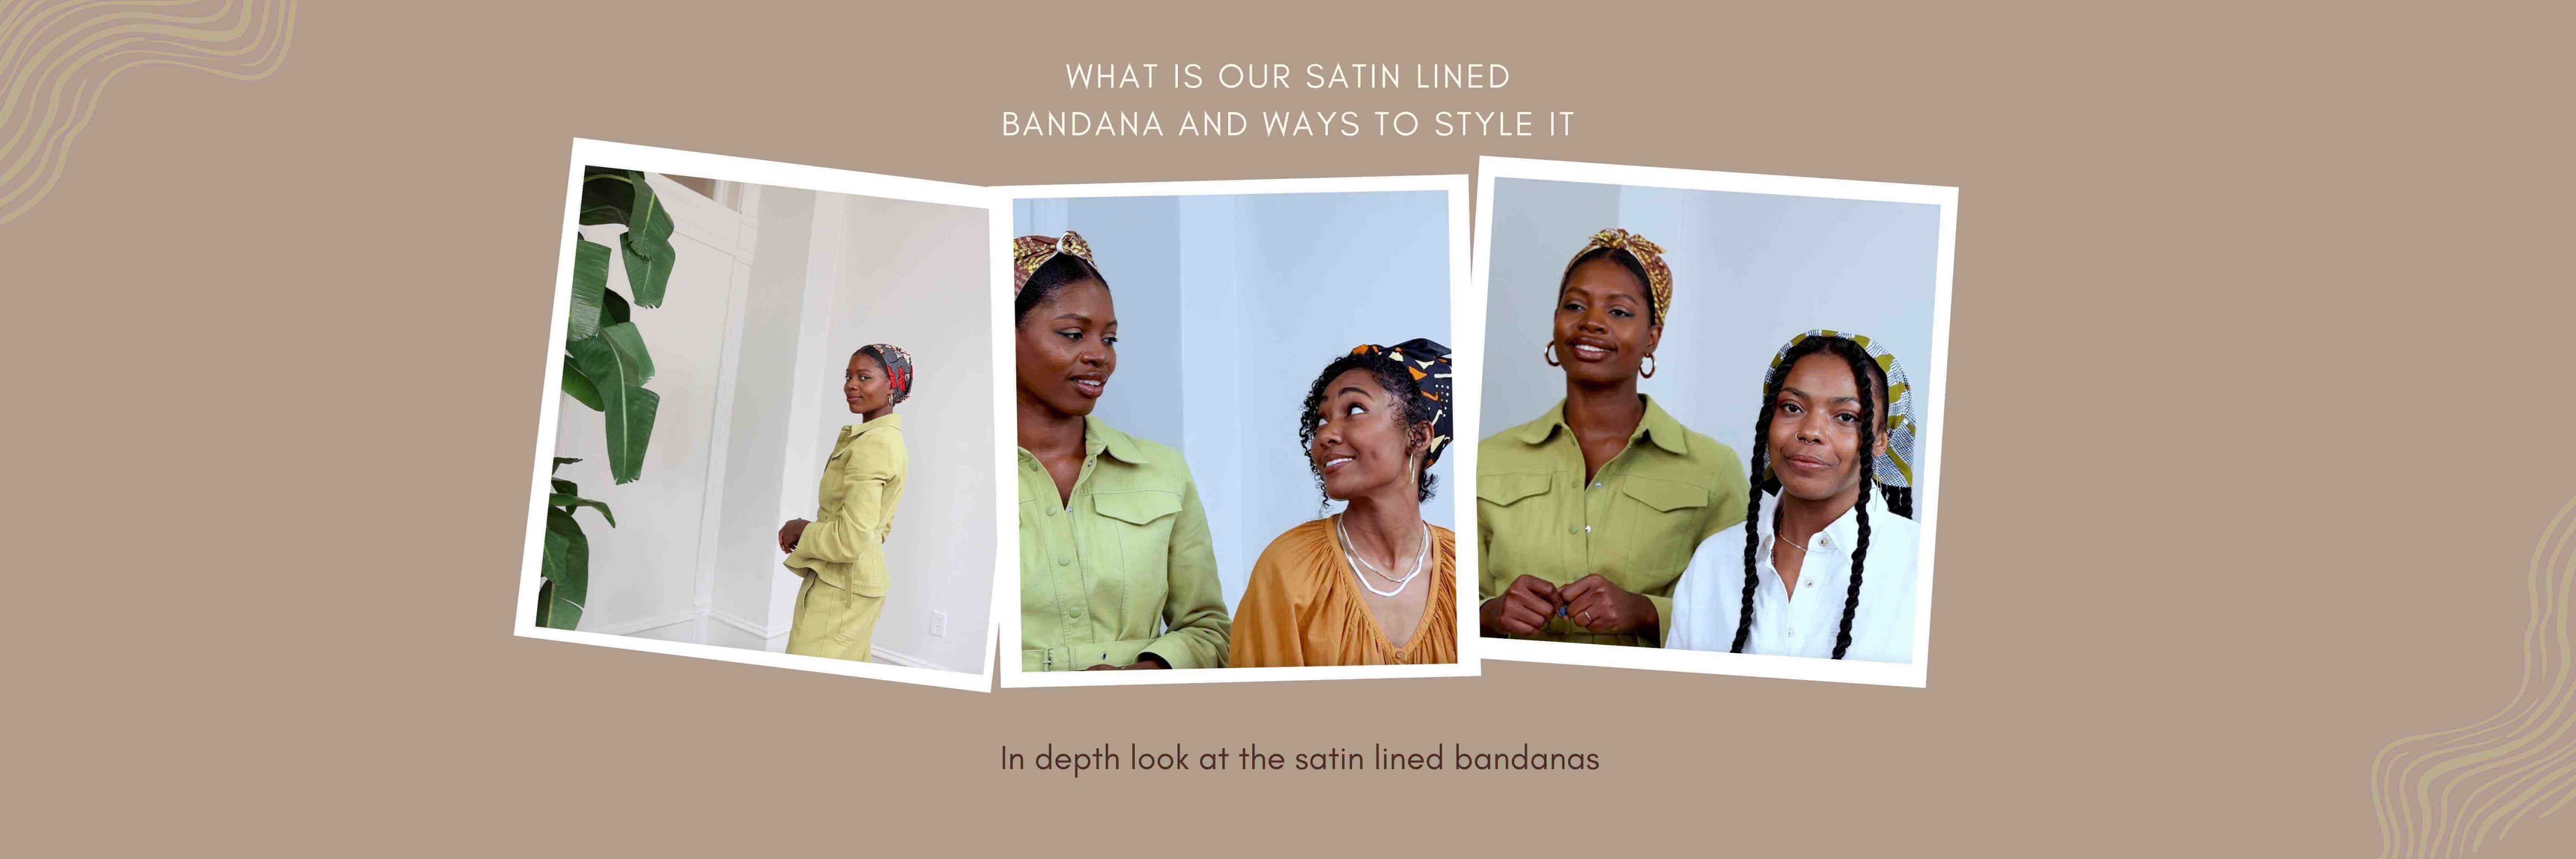 What is our satin lined bandana and ways to style it!